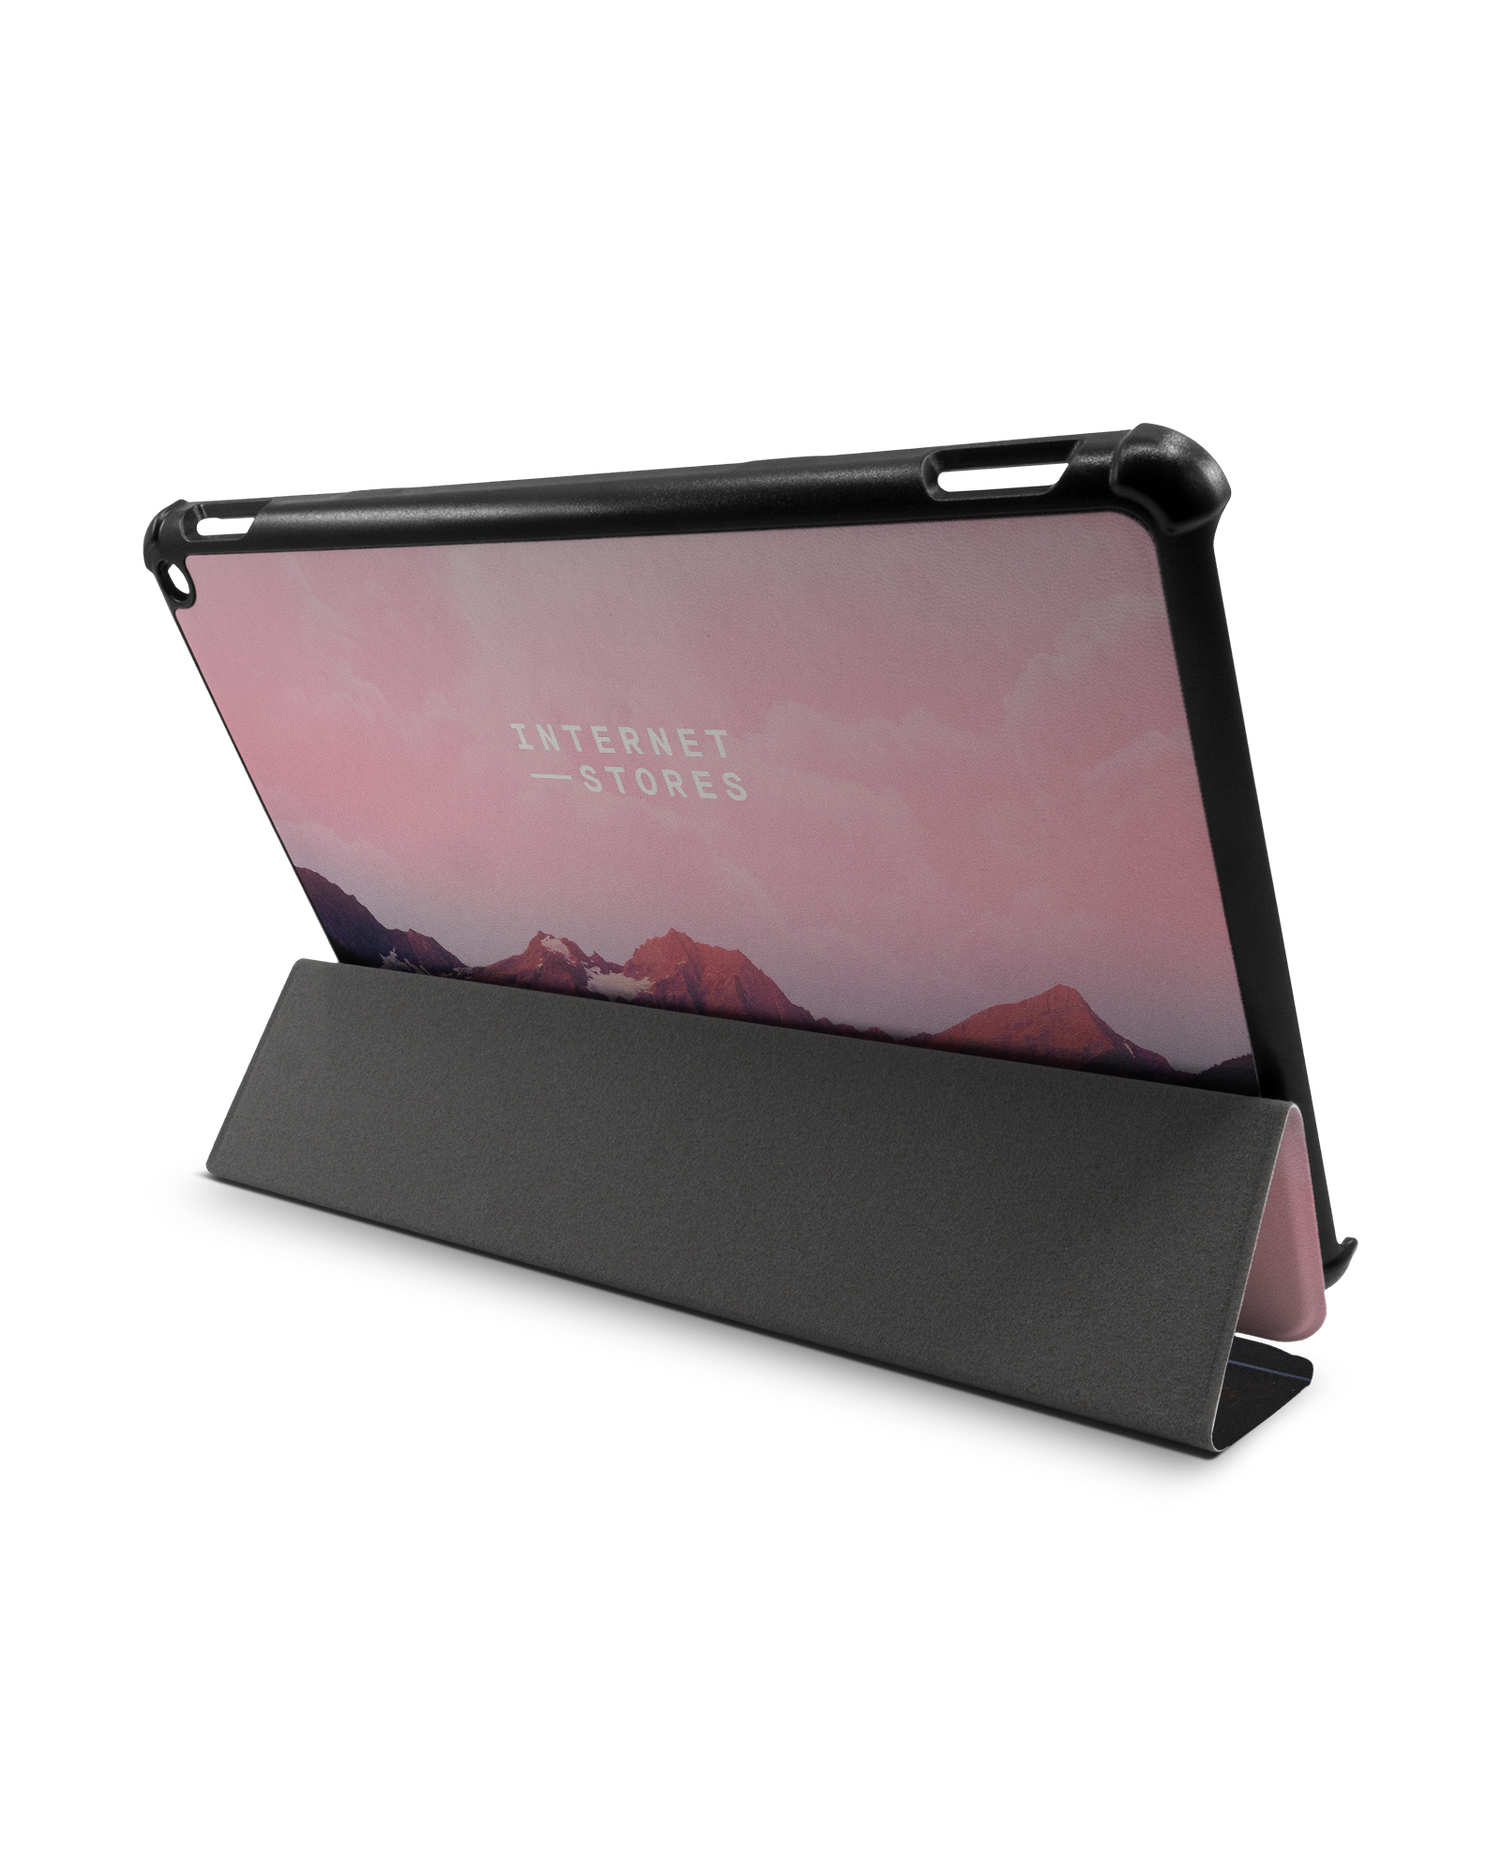 Lake Tablet Smart Case for Amazon Fire HD 10 (2021): Used as Stand